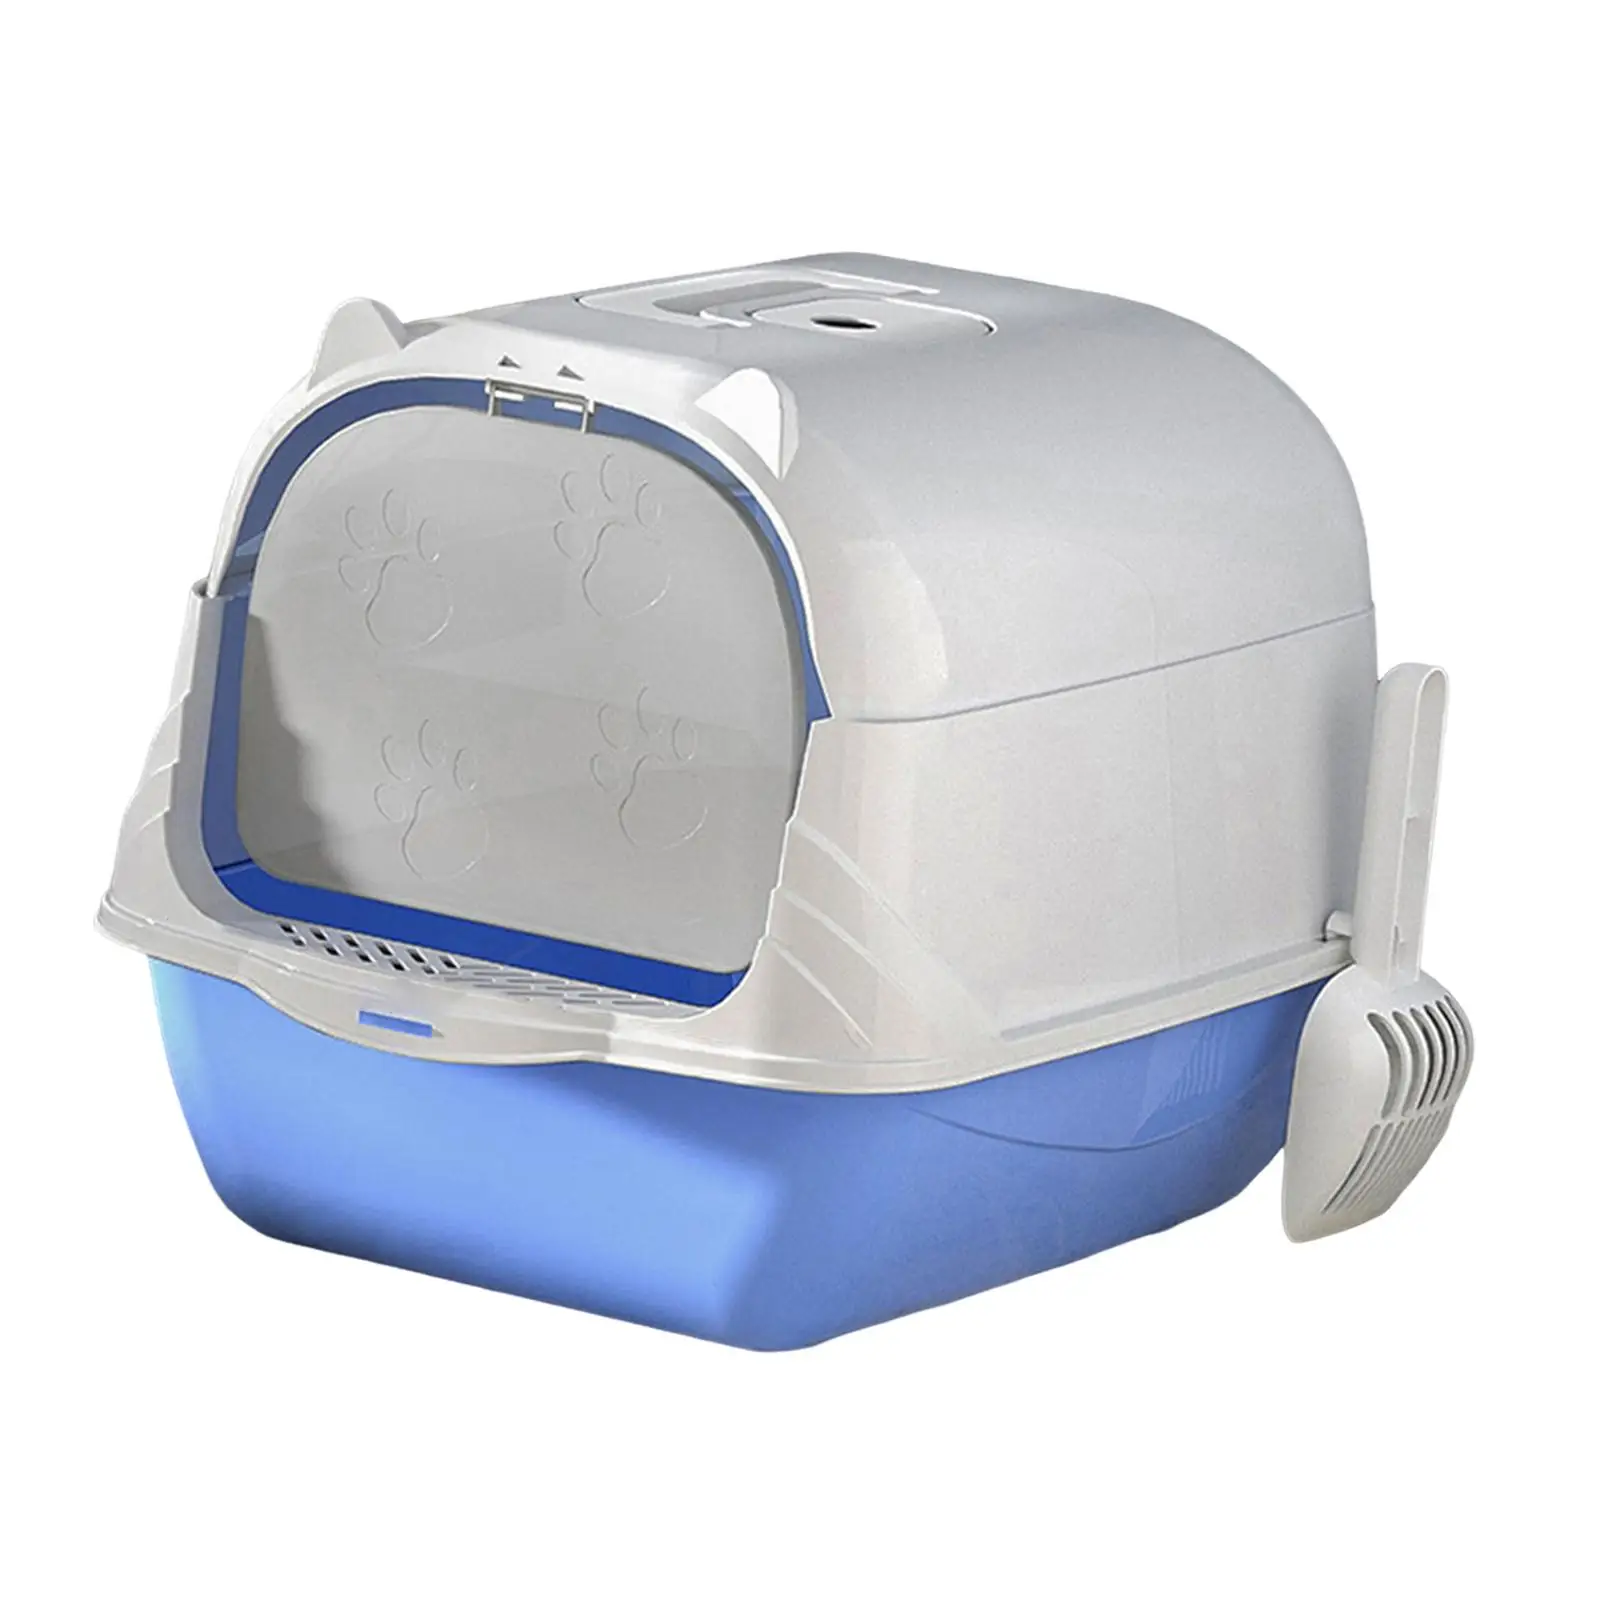 Hooded Cat Litter Box Durable Deep Loo with Scoop Two Way Movable Door Kitty Litter Tray Portable Enclosed Cat Toilet